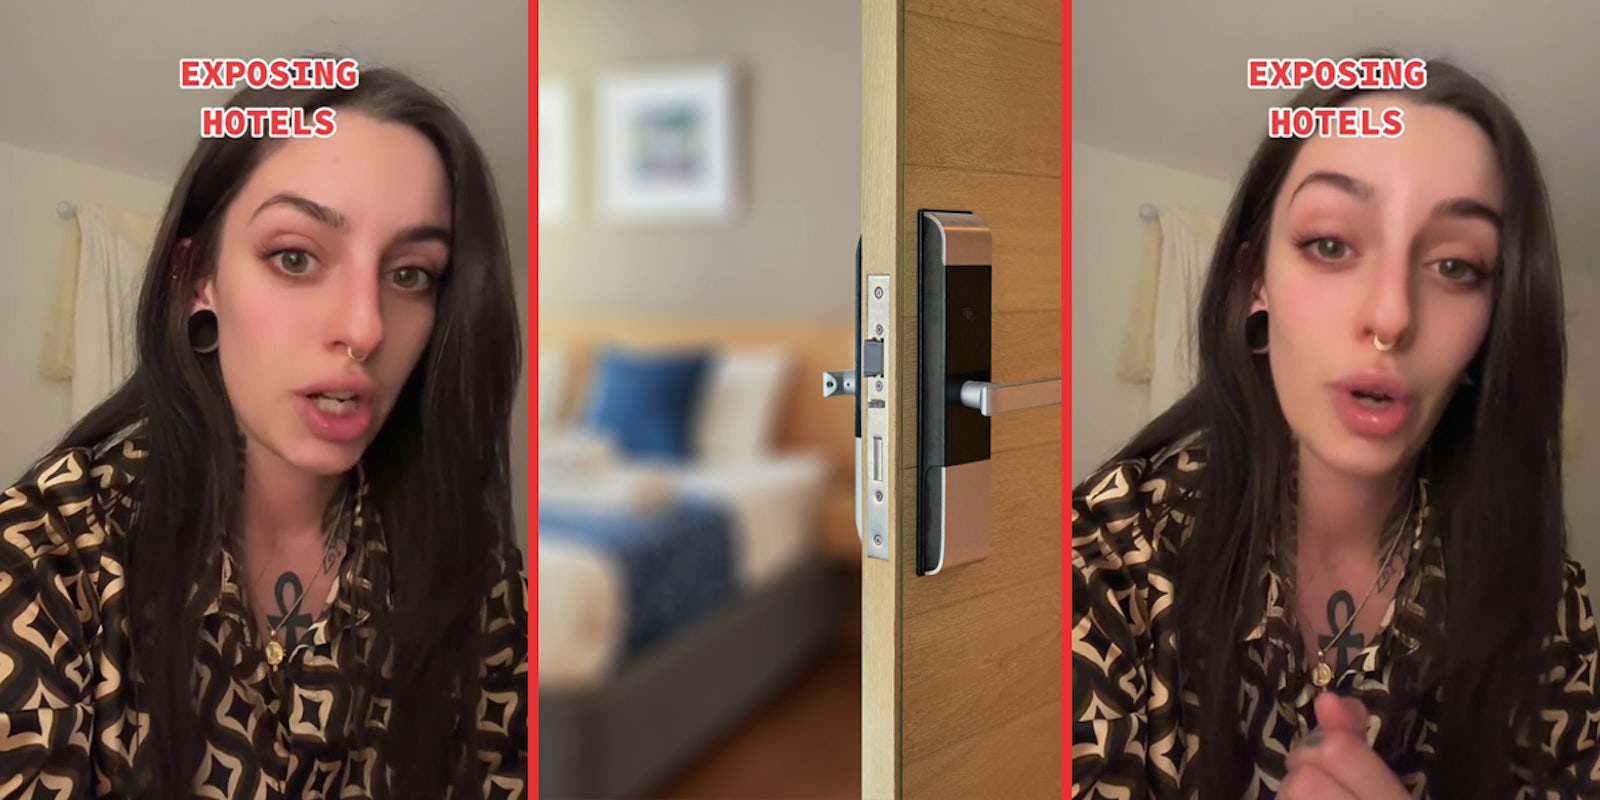 woman speaking with caption 'EXPOSING HOTELS' (l) hotel room door opening (c) woman speaking with caption 'EXPOSING HOTELS' (r)